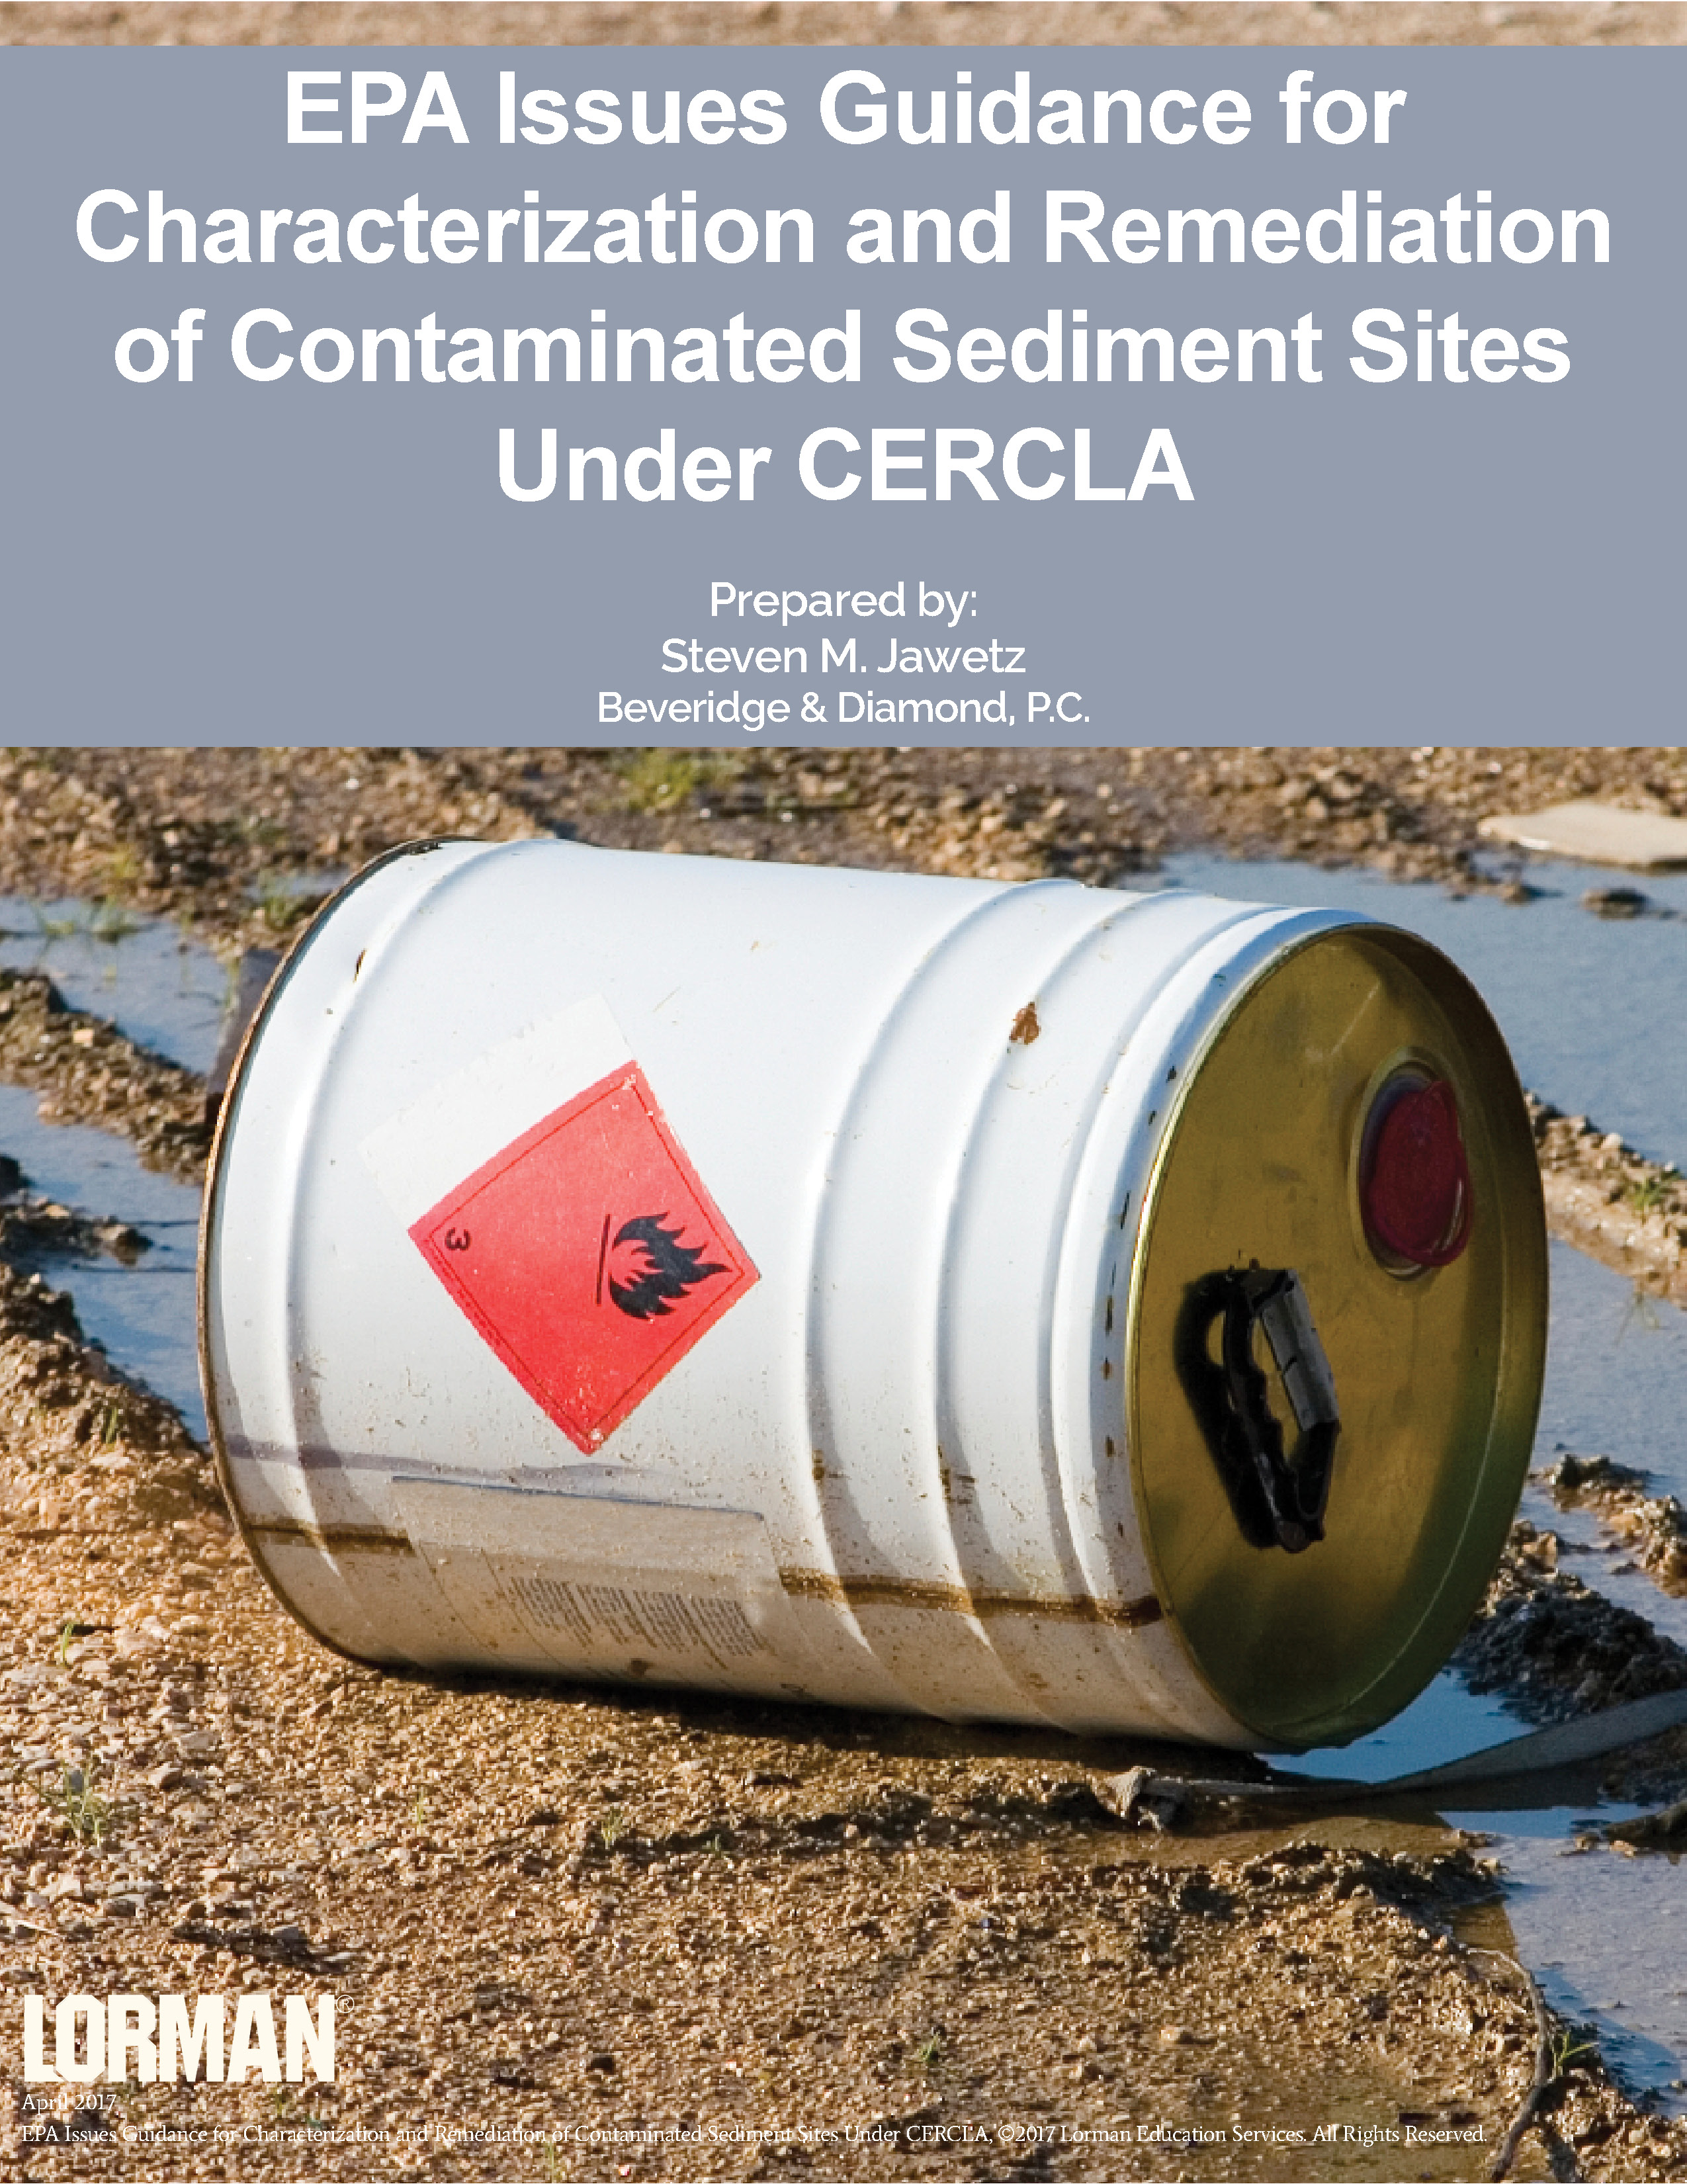 EPA Sets Guidance for Characterization and Remediation of Contaminated Sediment Sites Under CERCLA